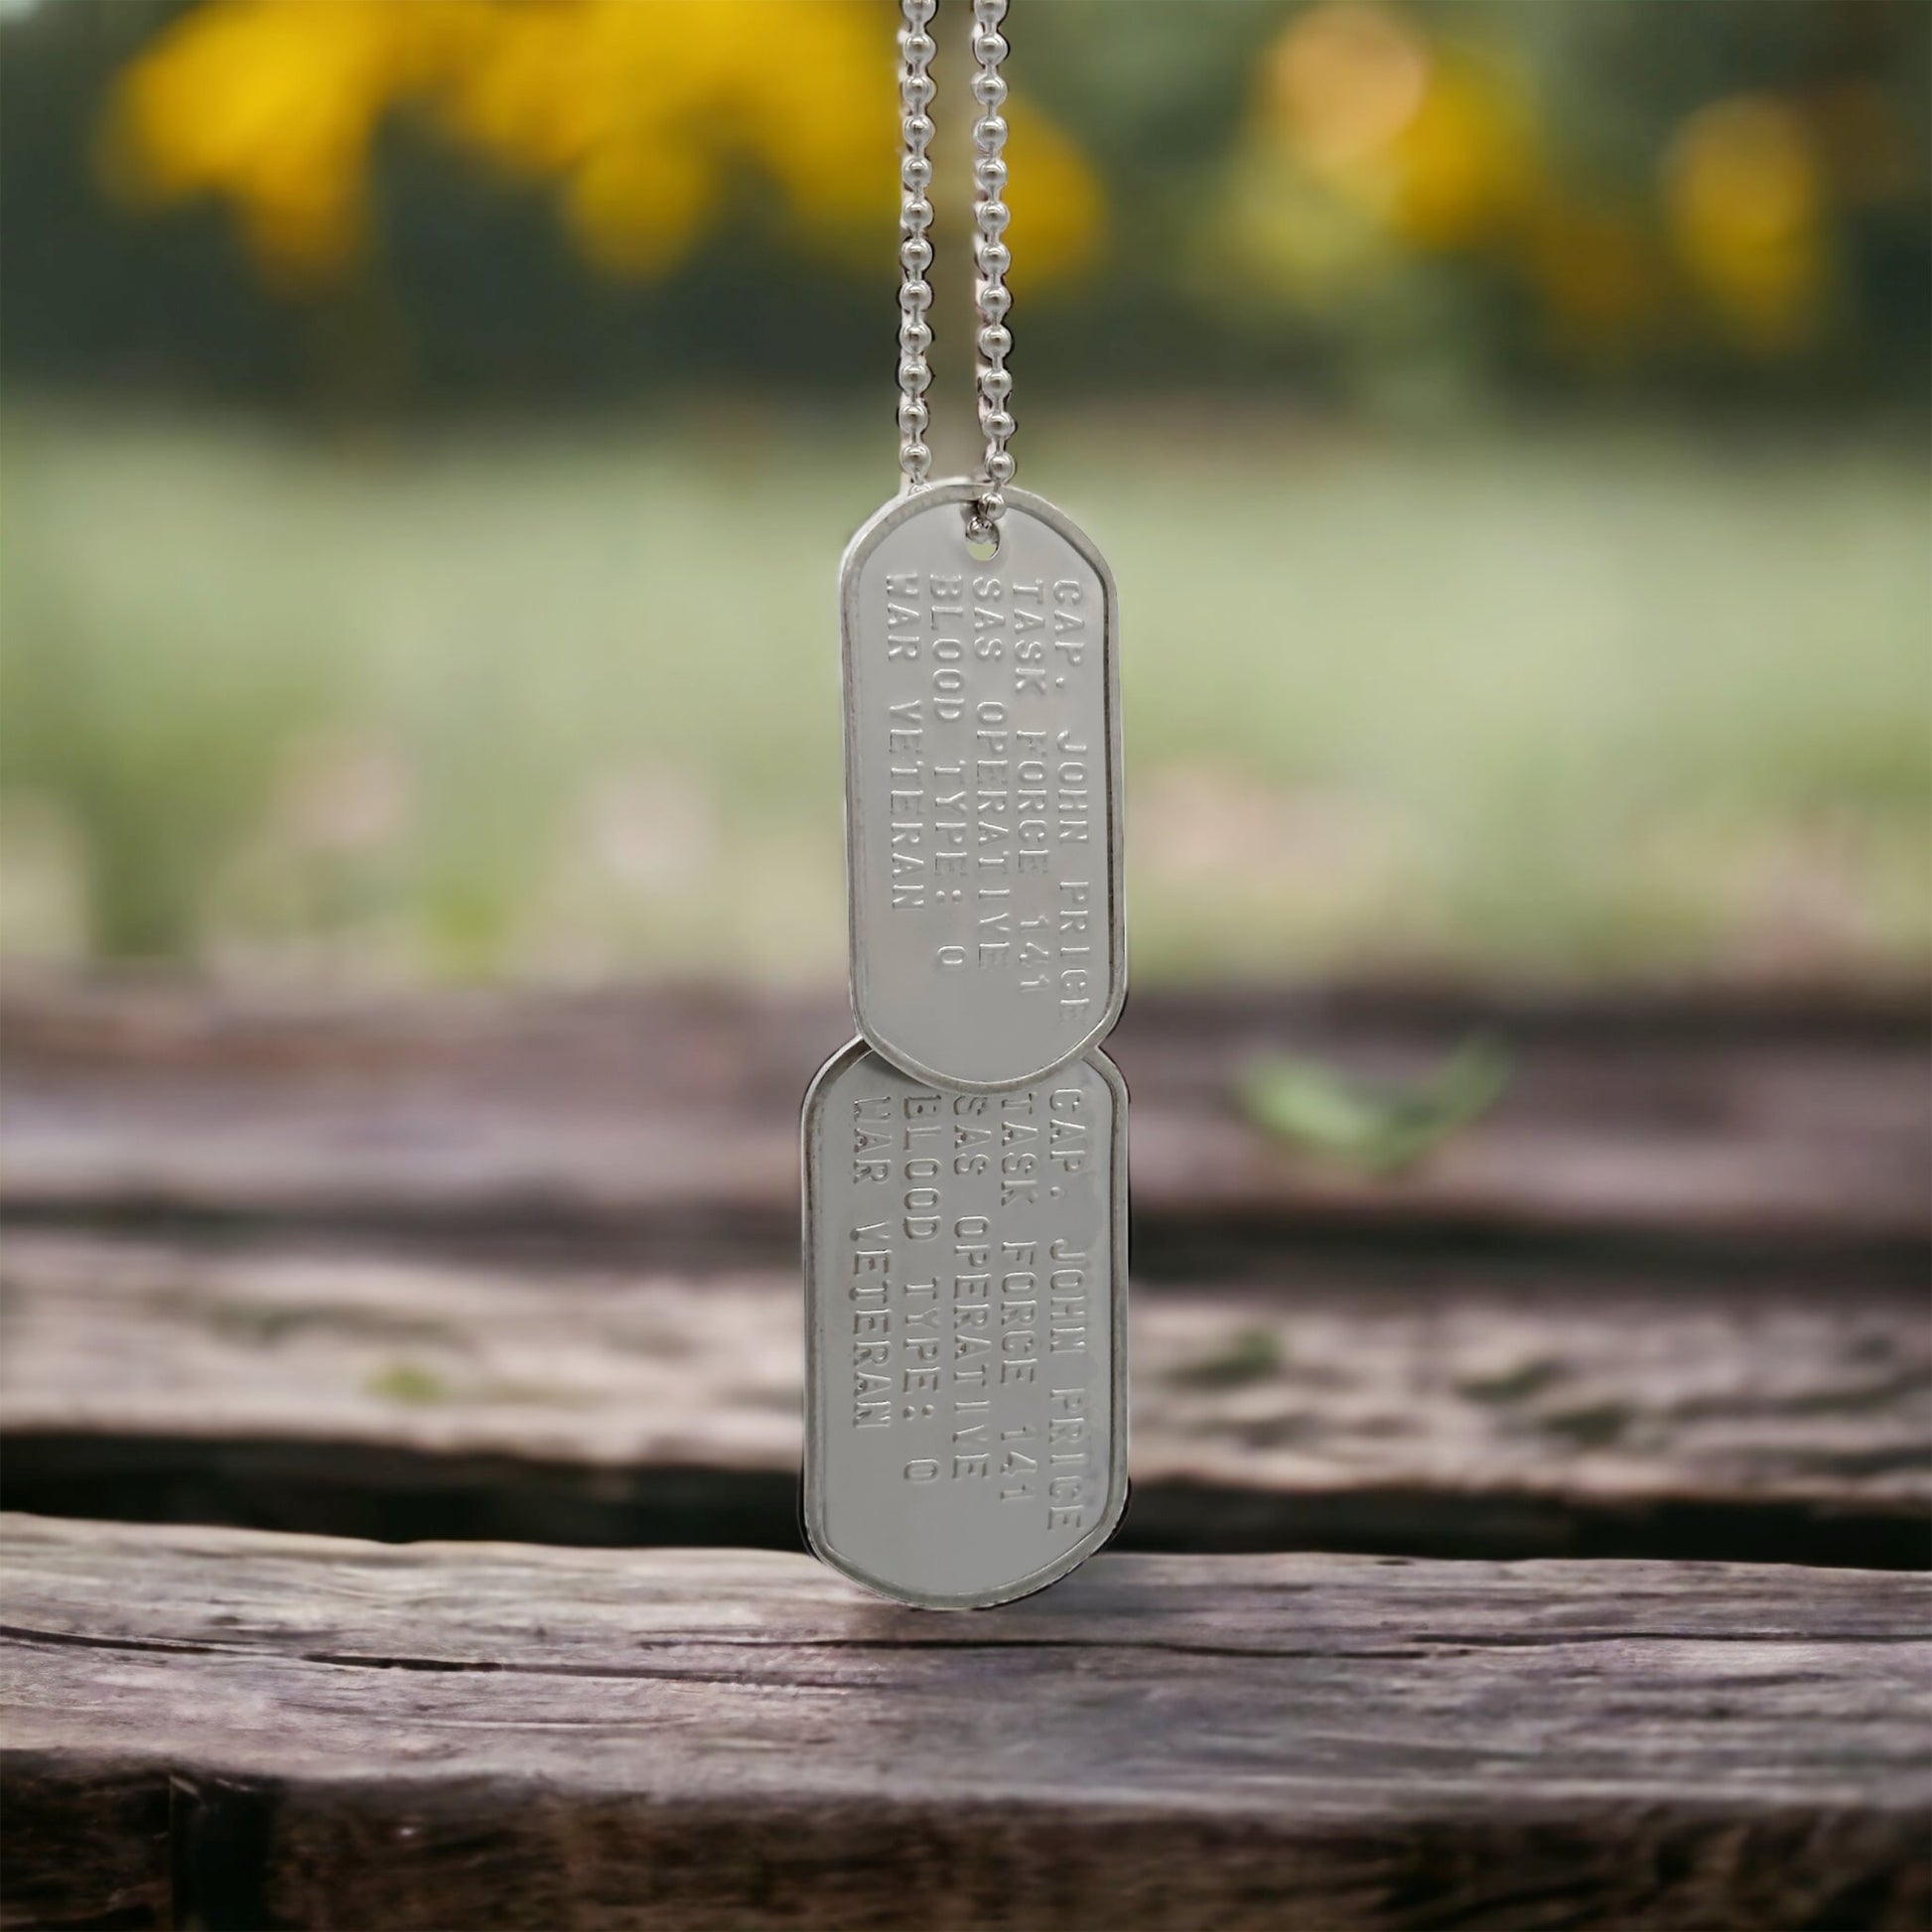 Us Army 24 Sterling Silver Dog Tag Medal With Stainless Steel